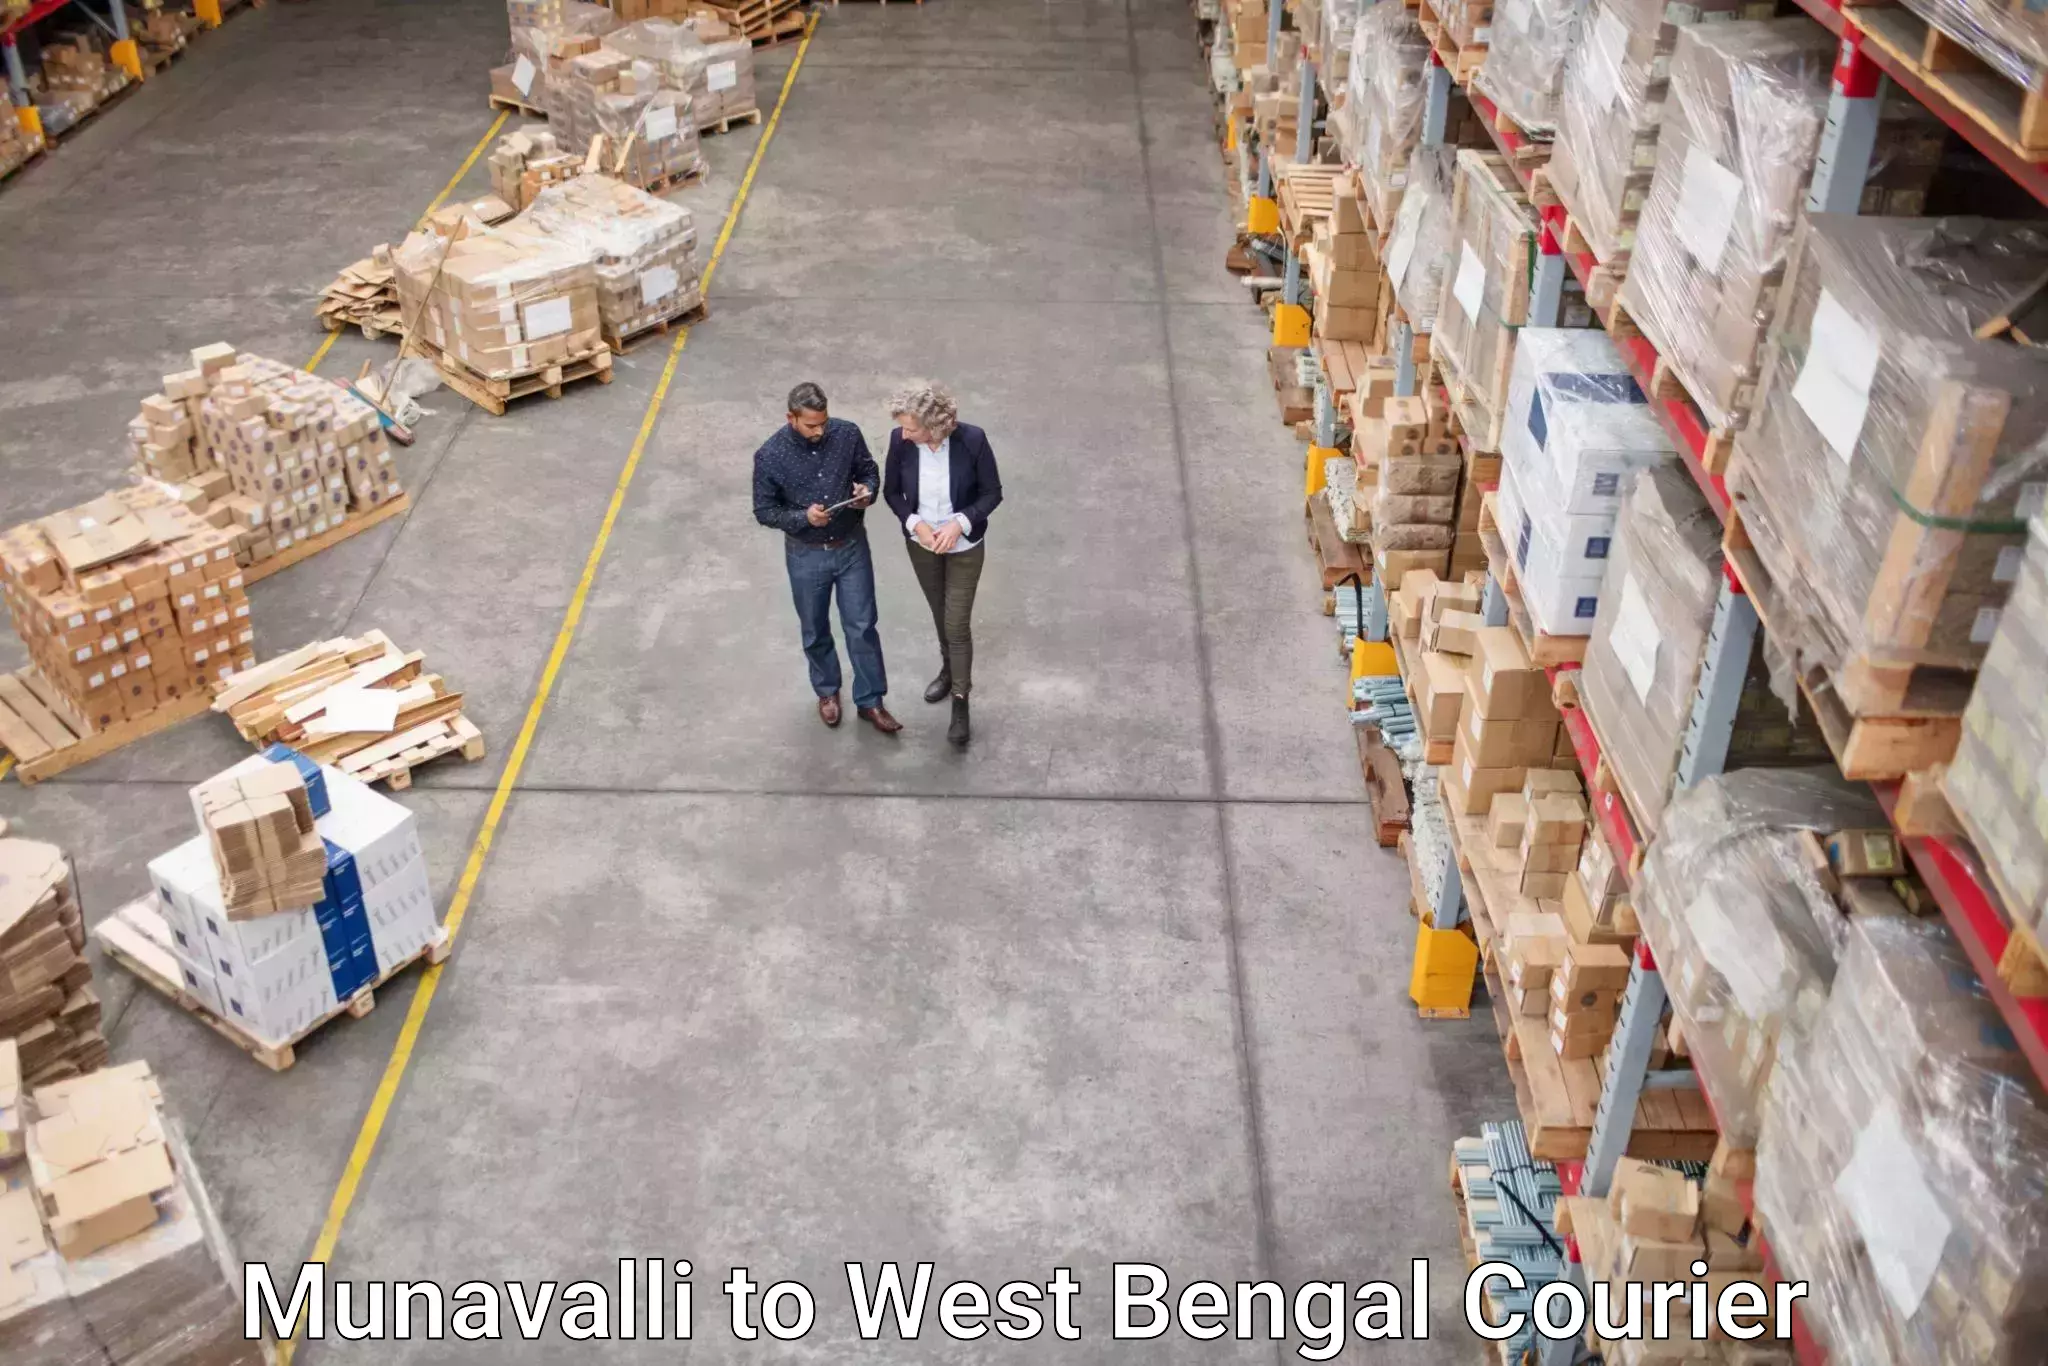 Express delivery network Munavalli to West Bengal